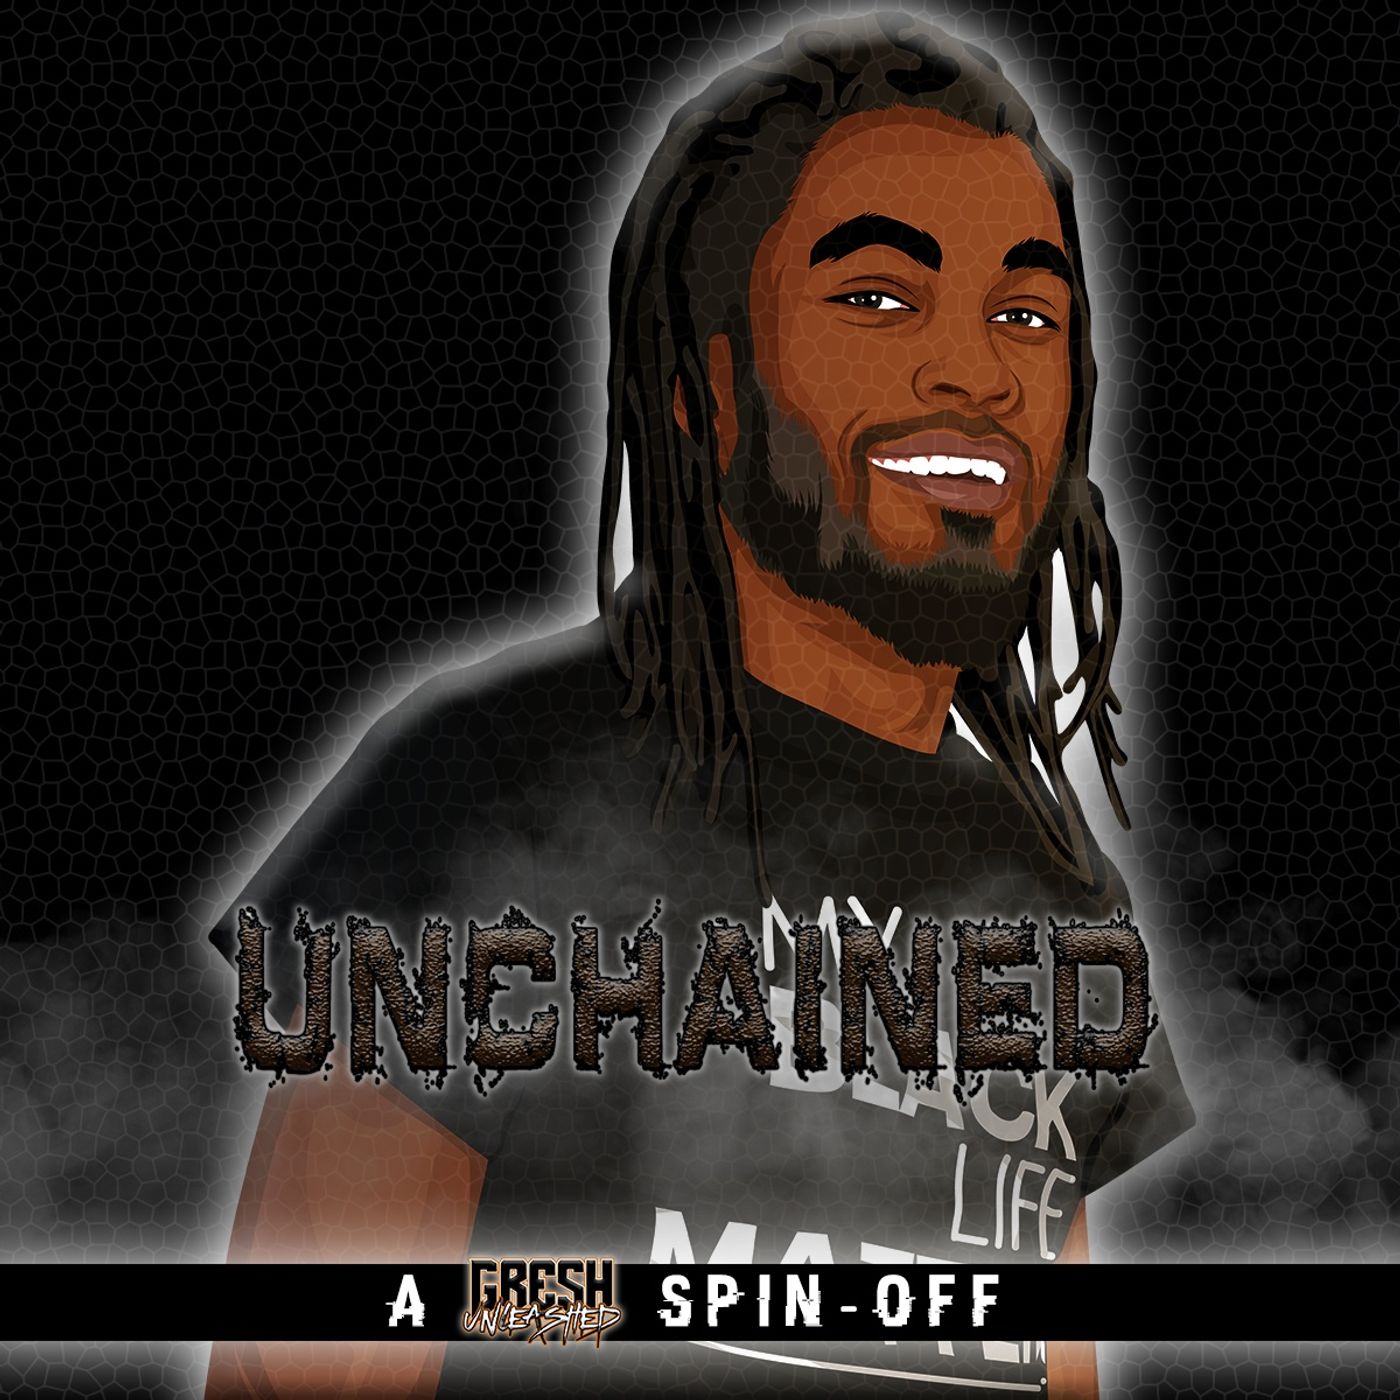 Gresh Unleashed: Unchained